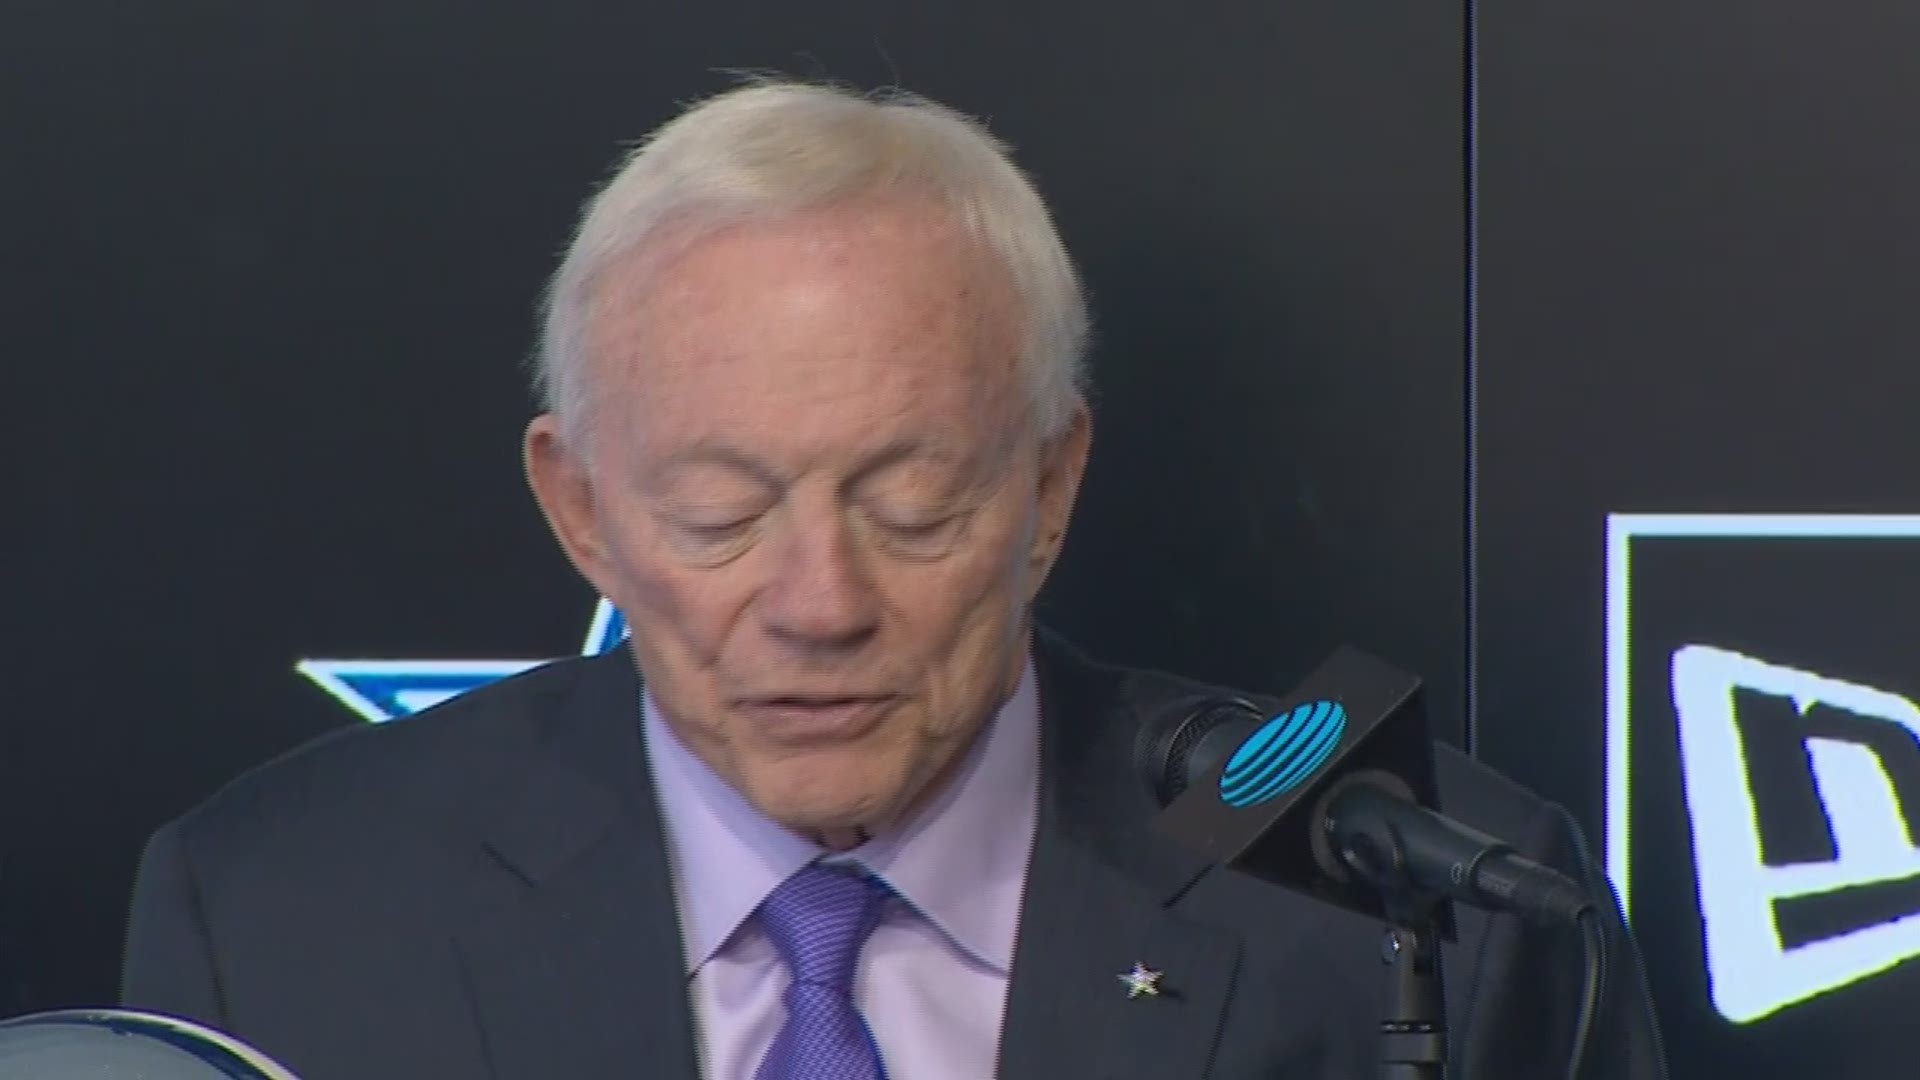 Cowboys owner Jerry Jones says he's had "great discussions" with Jason Witten and doesn't have an official announcement on the tight end's future. WFAA.com